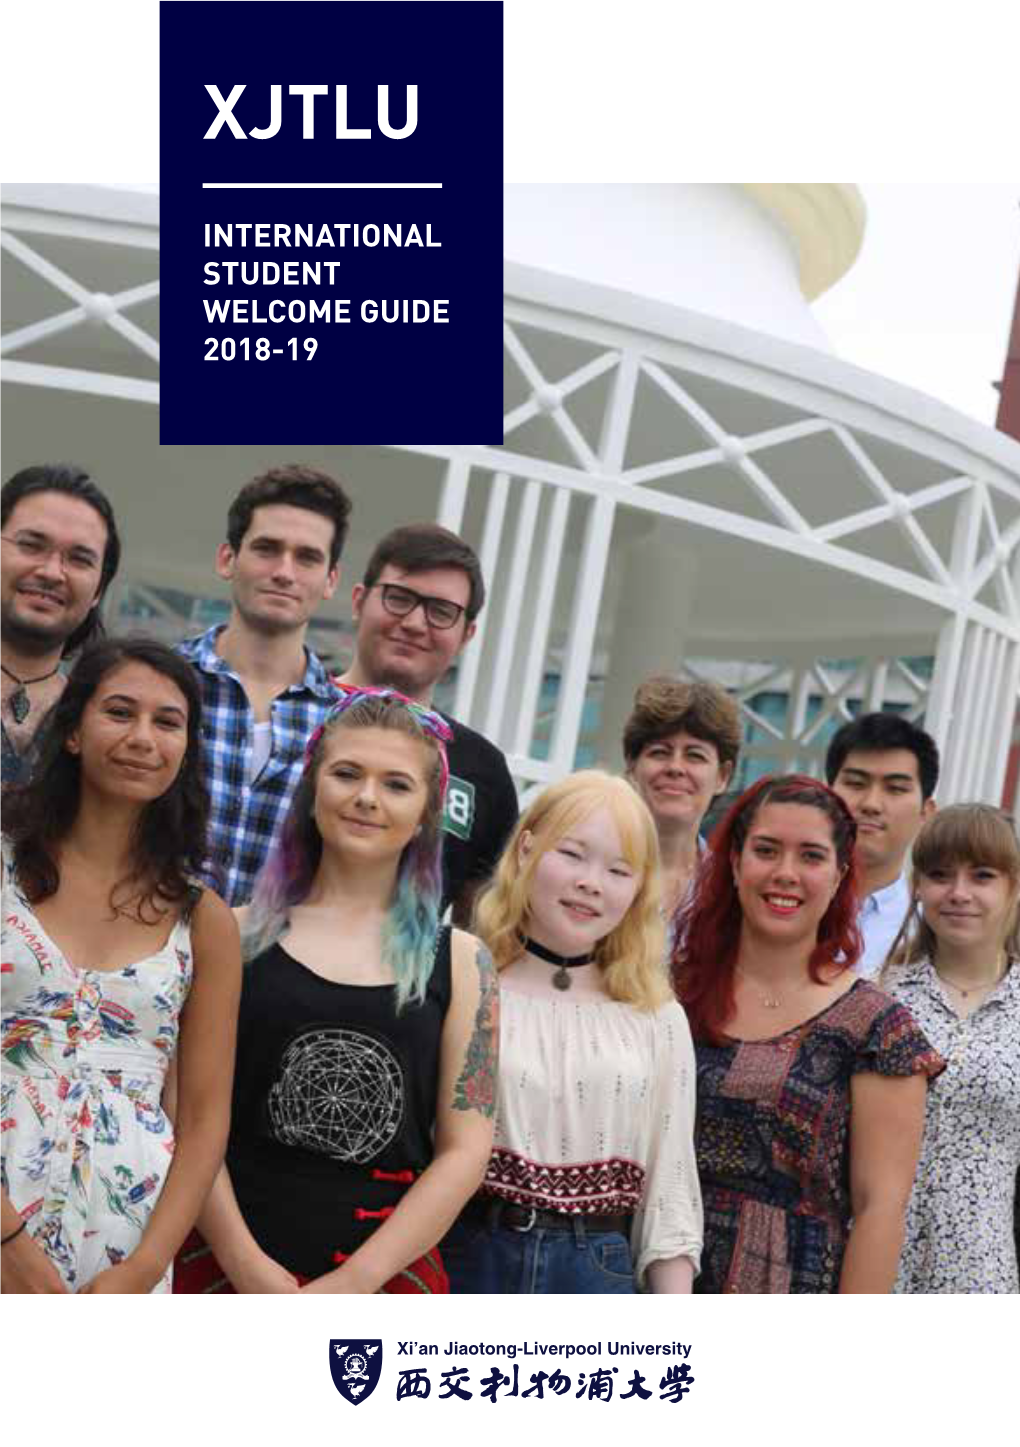 International Student Welcome Guide 2018-19 Welcome Xjtlu International Student Welcome Guide 2018-19 Student Welcome International Xjtlu